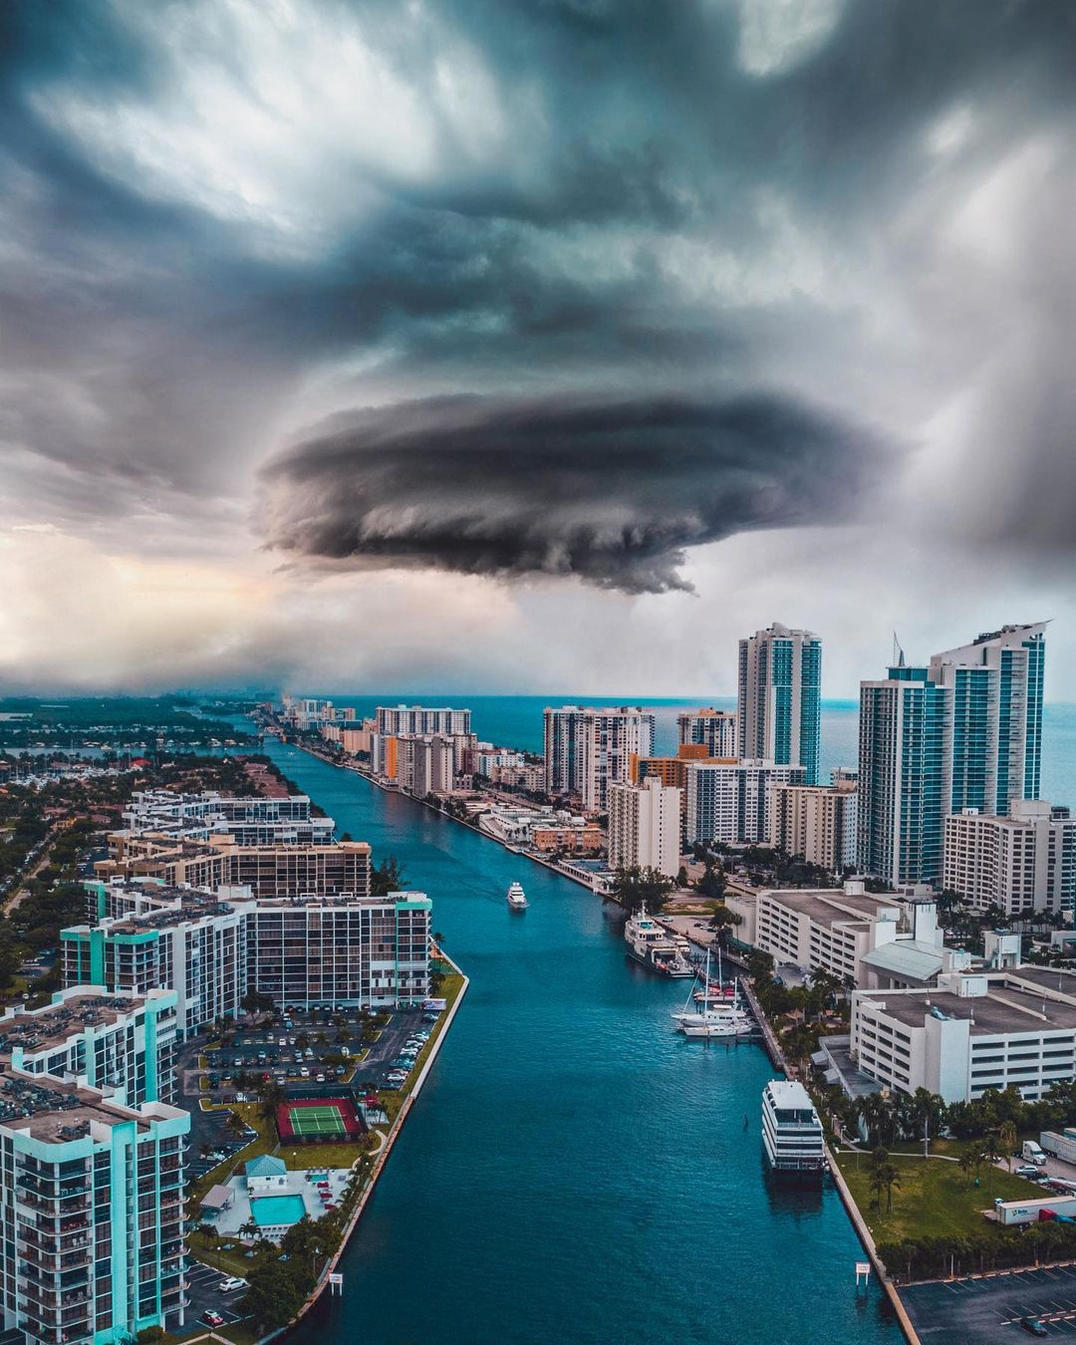 Miami | Travel community - A cloudy day